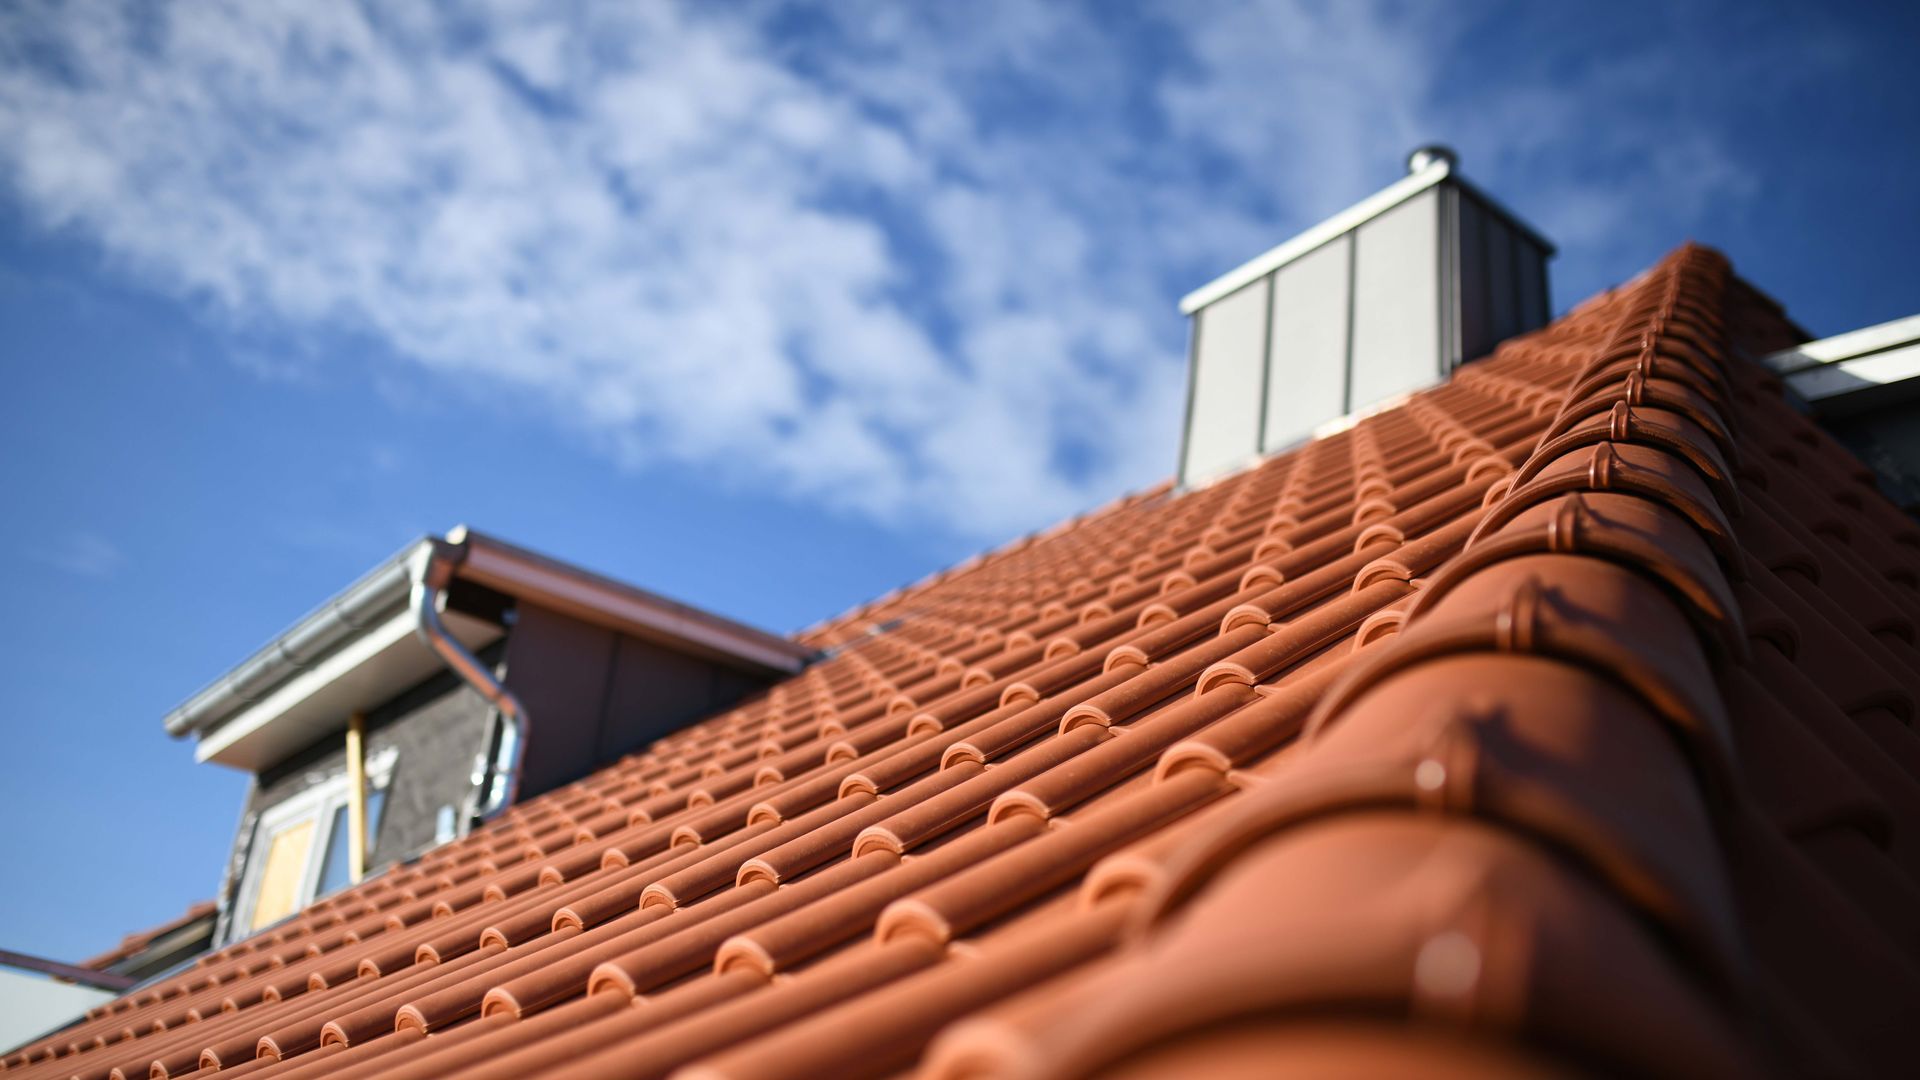 A close up of a red tiled roof with a chimney on top of it